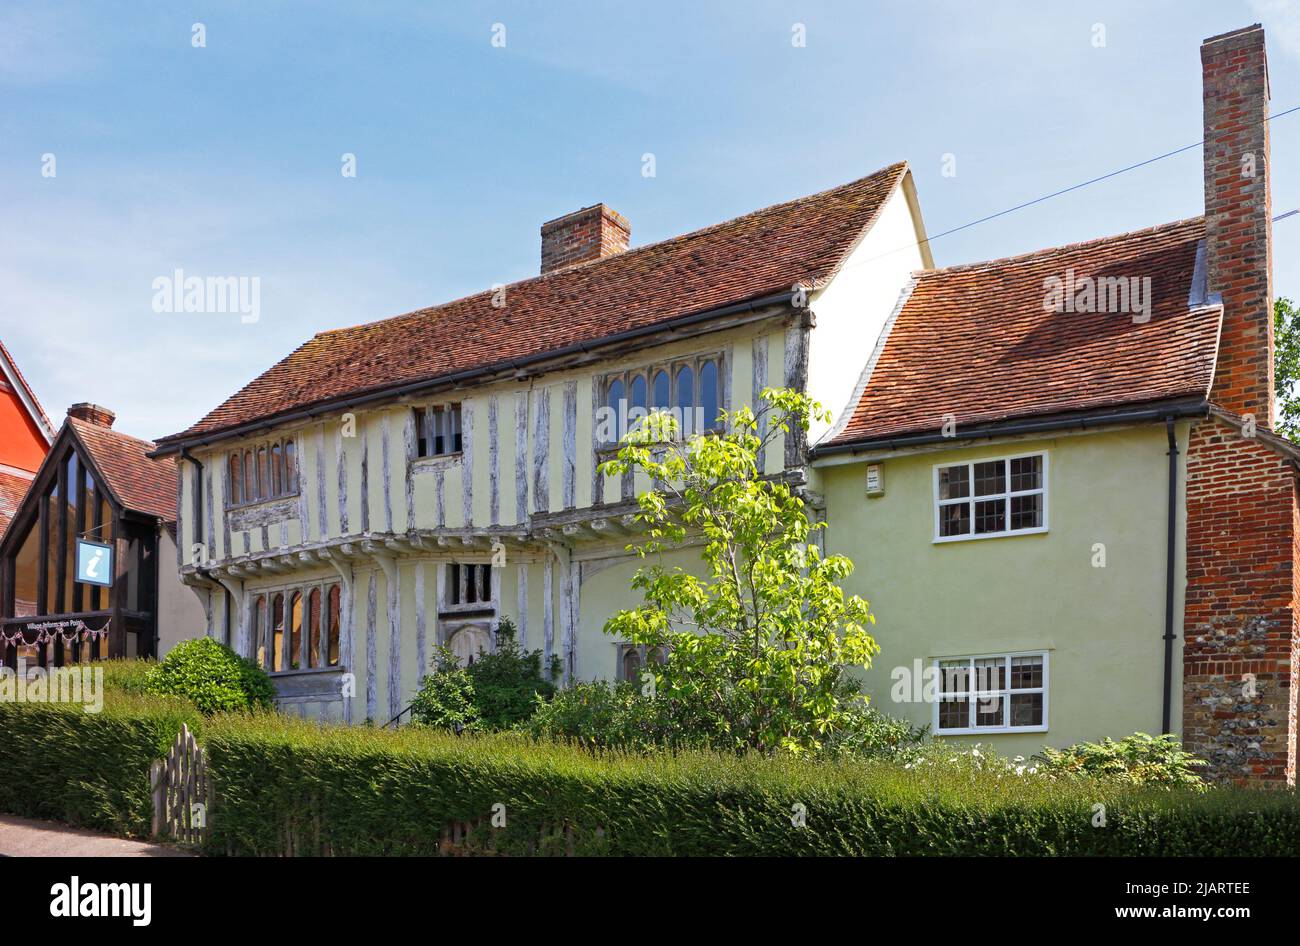 A view of a well preserved timber-framed medieval house in the picturesque village of Lavenham, Suffolk, England, United Kingdom. Stock Photo